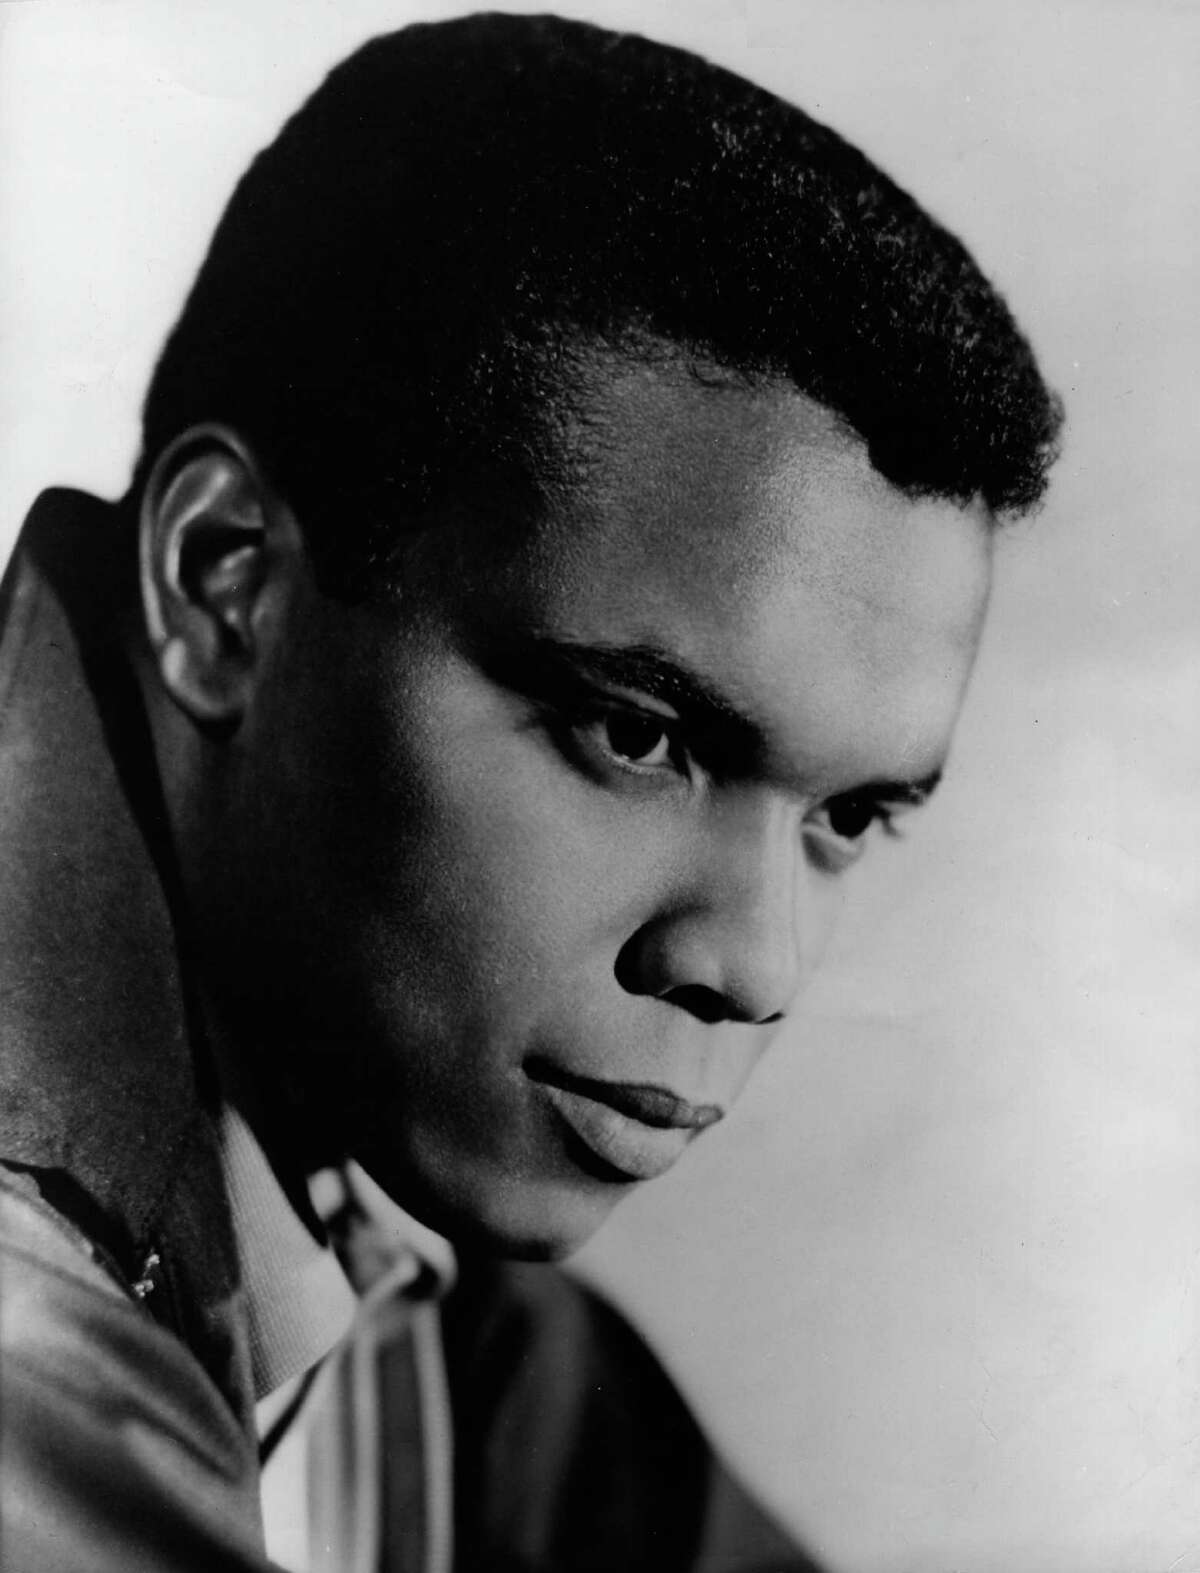 Native Houstonian Johnny Nash had a hit with "I Can See Clearly Now" in 1972, and the song has been covered many times since.